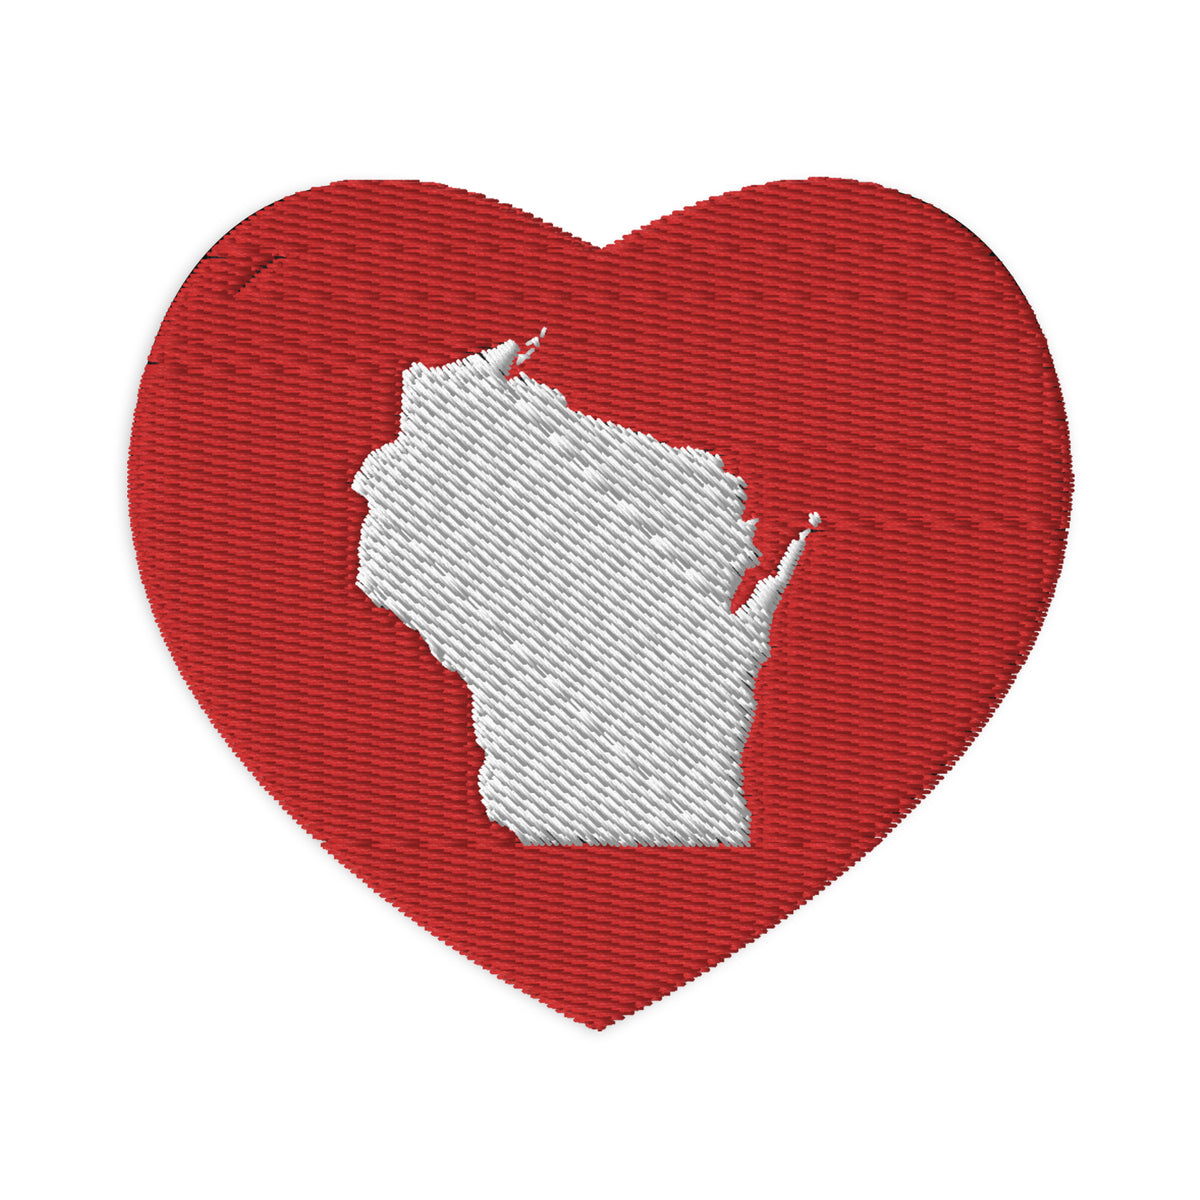 Heart of Wisconsin Morale Patch